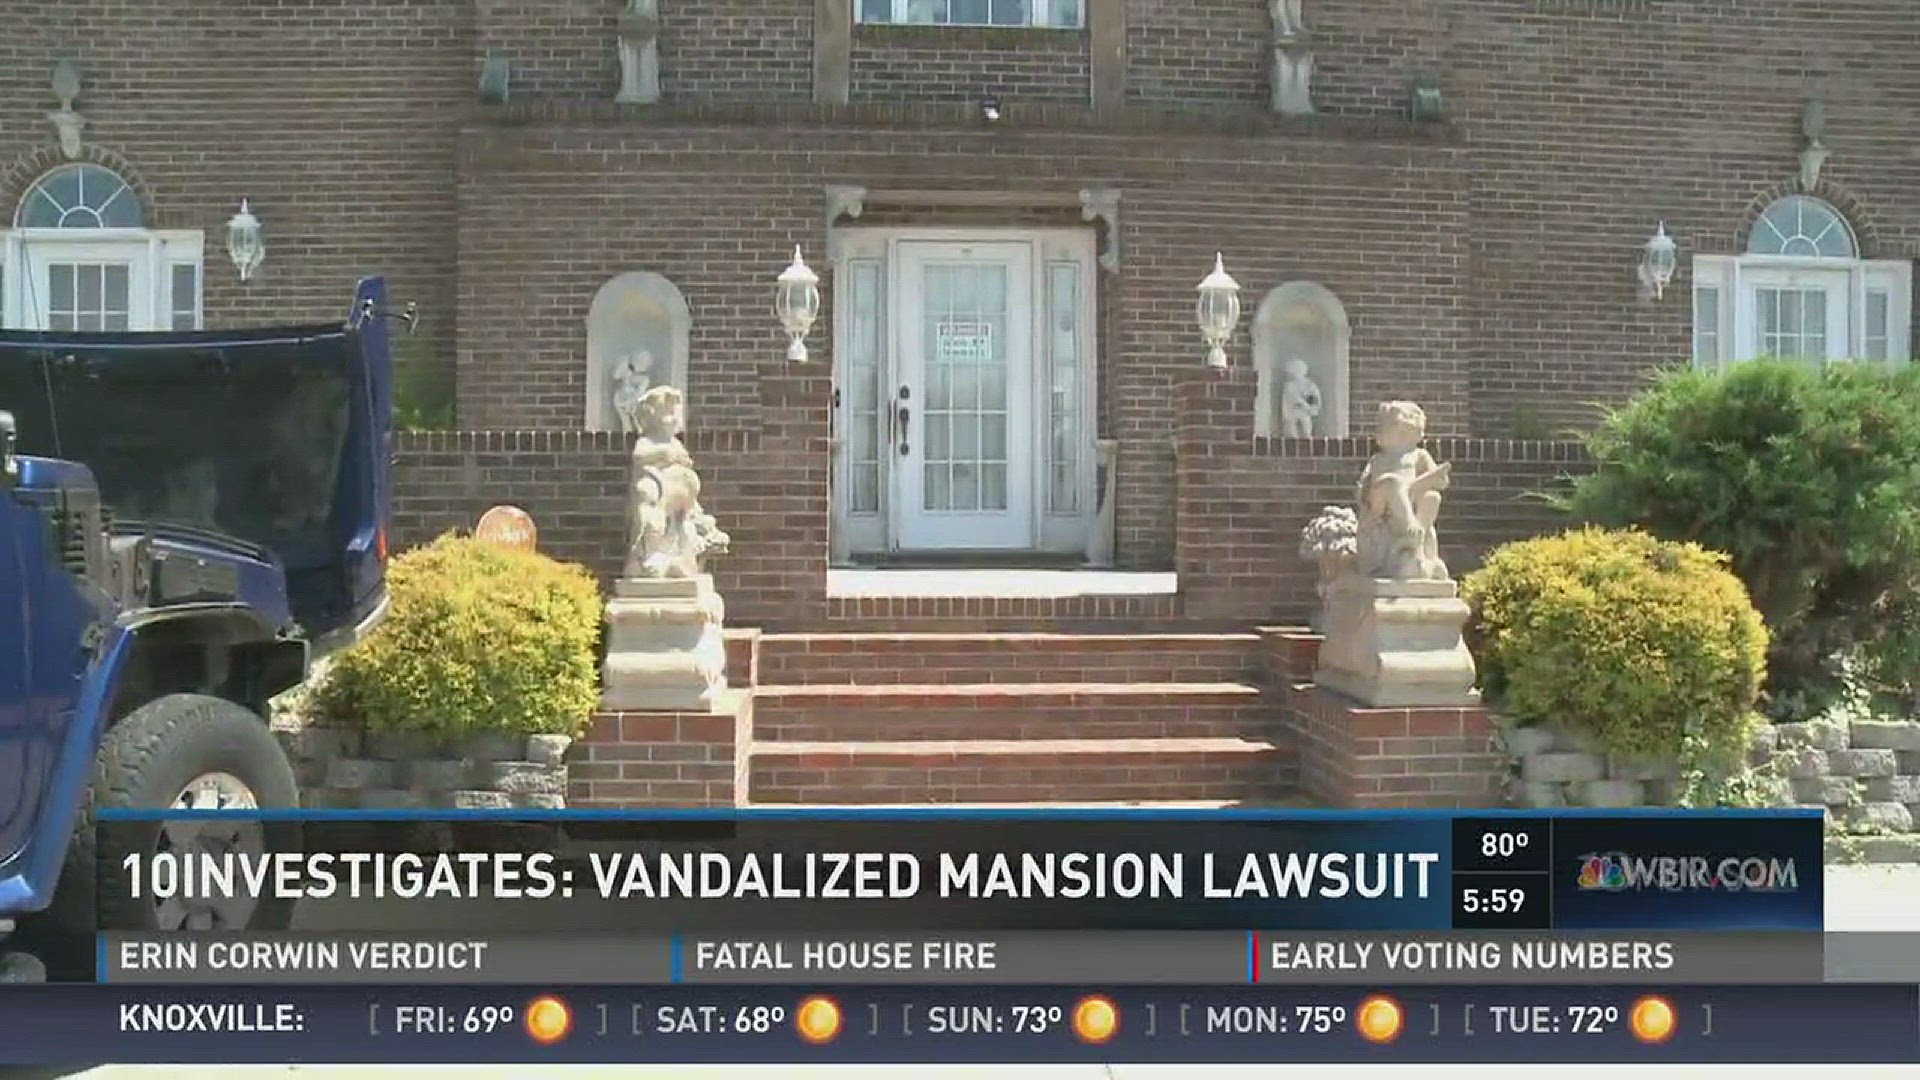 Nov. 3, 2016: The owners of a Hamblen County mansion say three years have passed with no arrests after someone vandalized their home repeatedly while they were out of town.